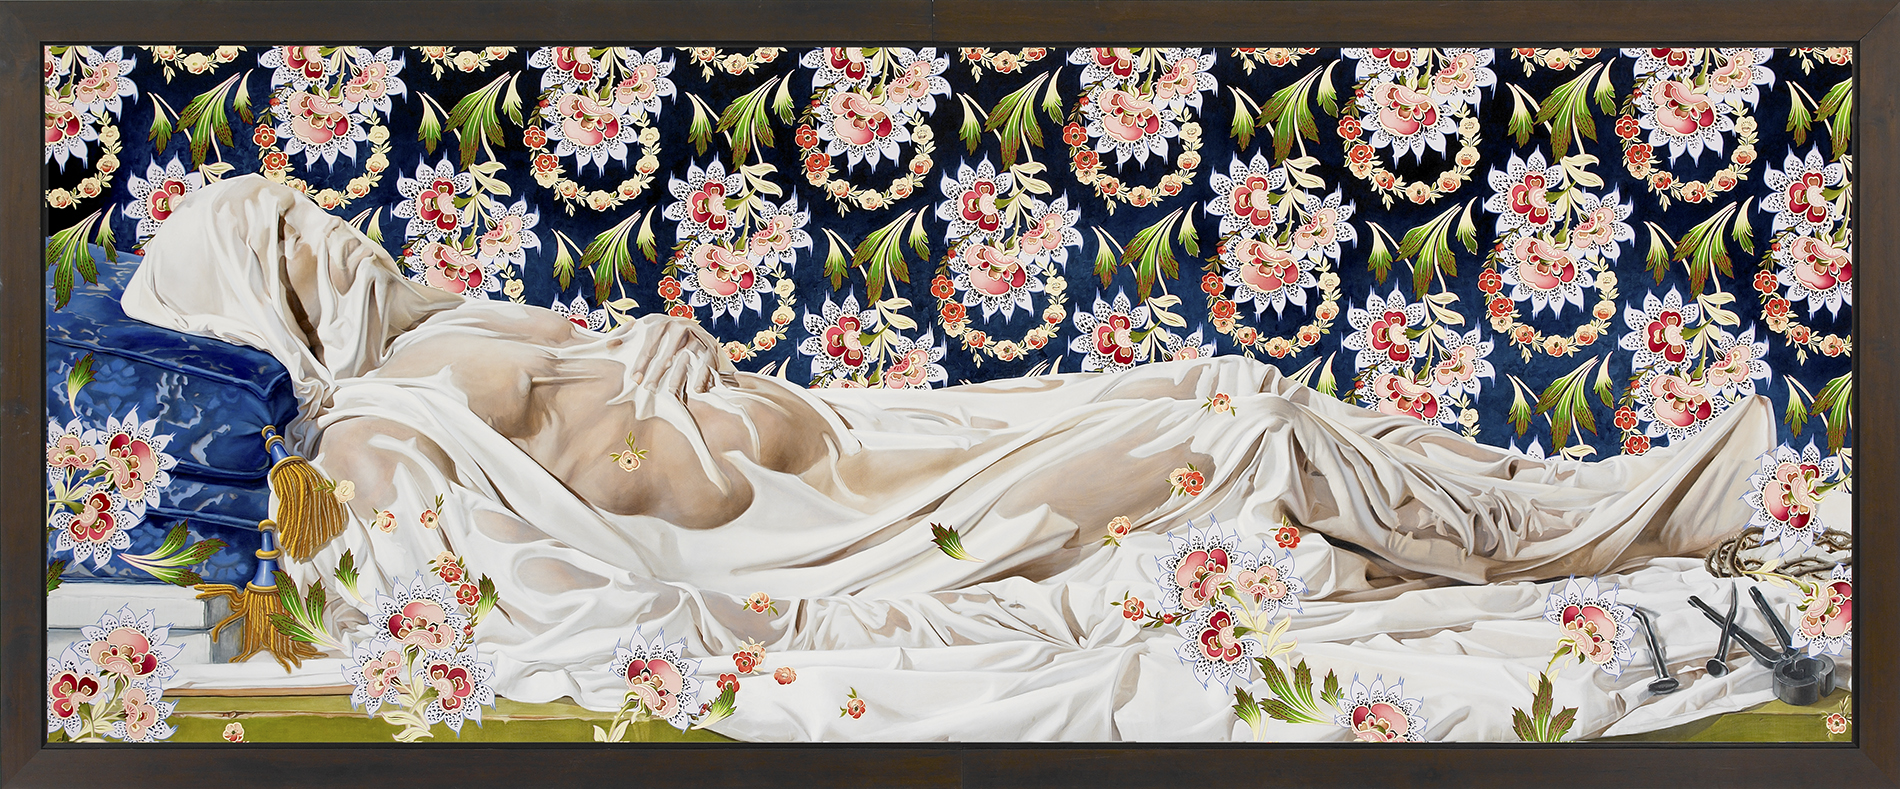 Kehinde Wiley | Down | The Veiled Christ, 2008 Oil on Canvas. | 2